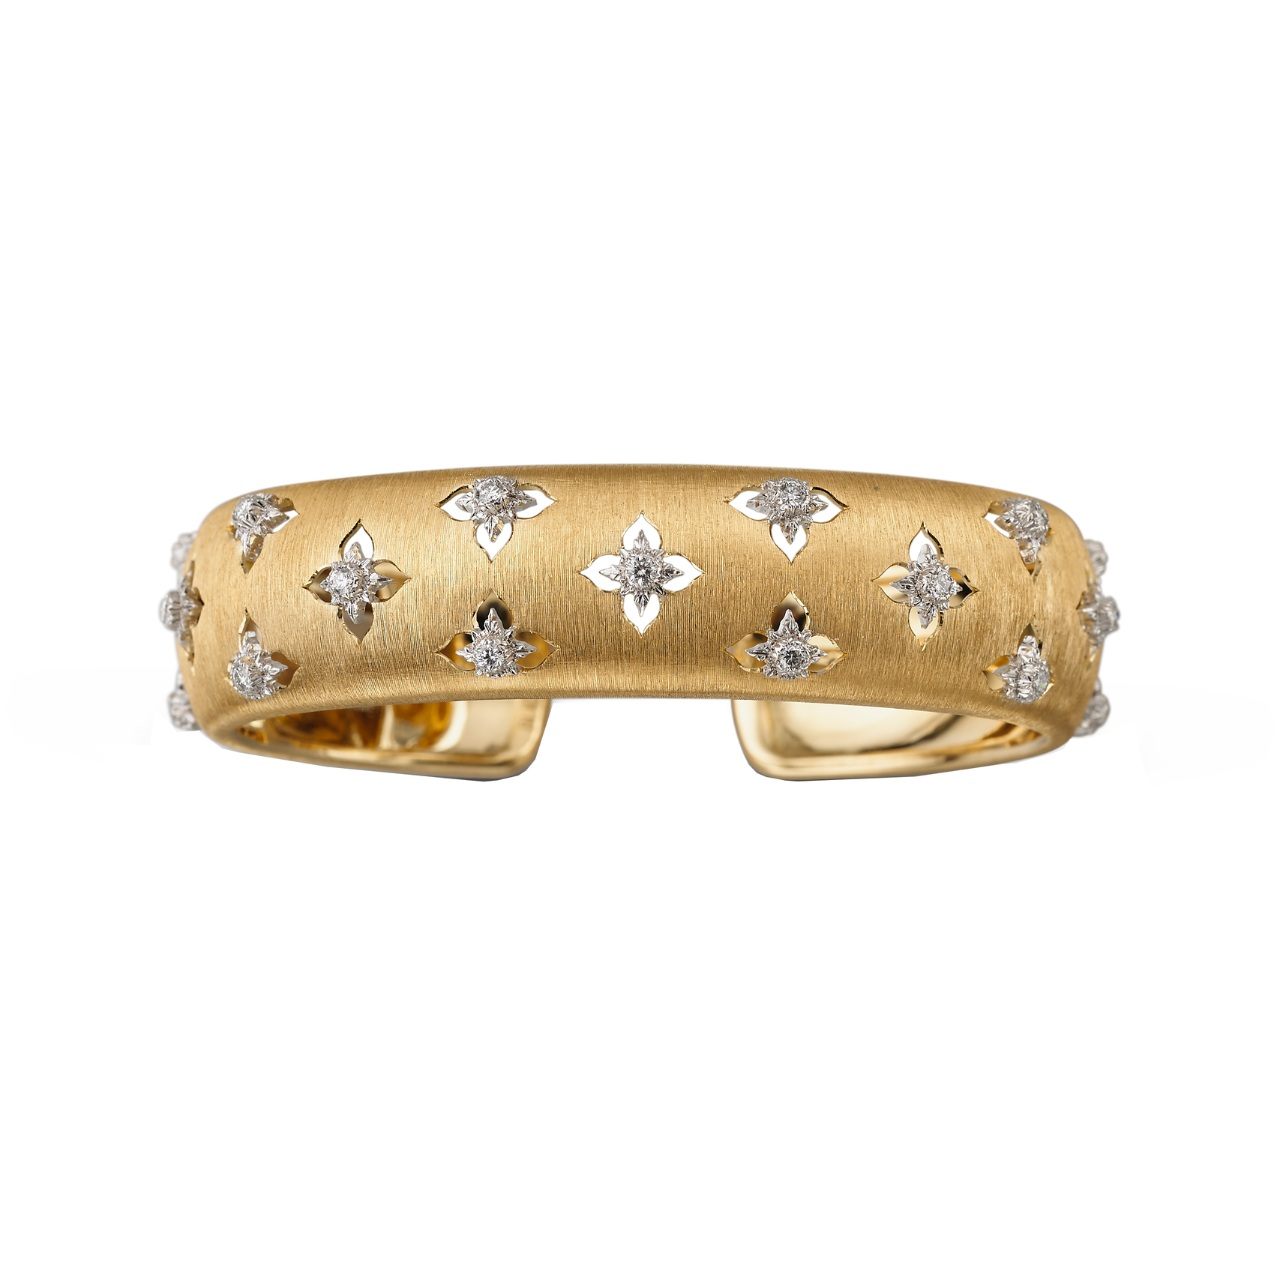 Buccellati bracelet in yellow and white gold with diamonds